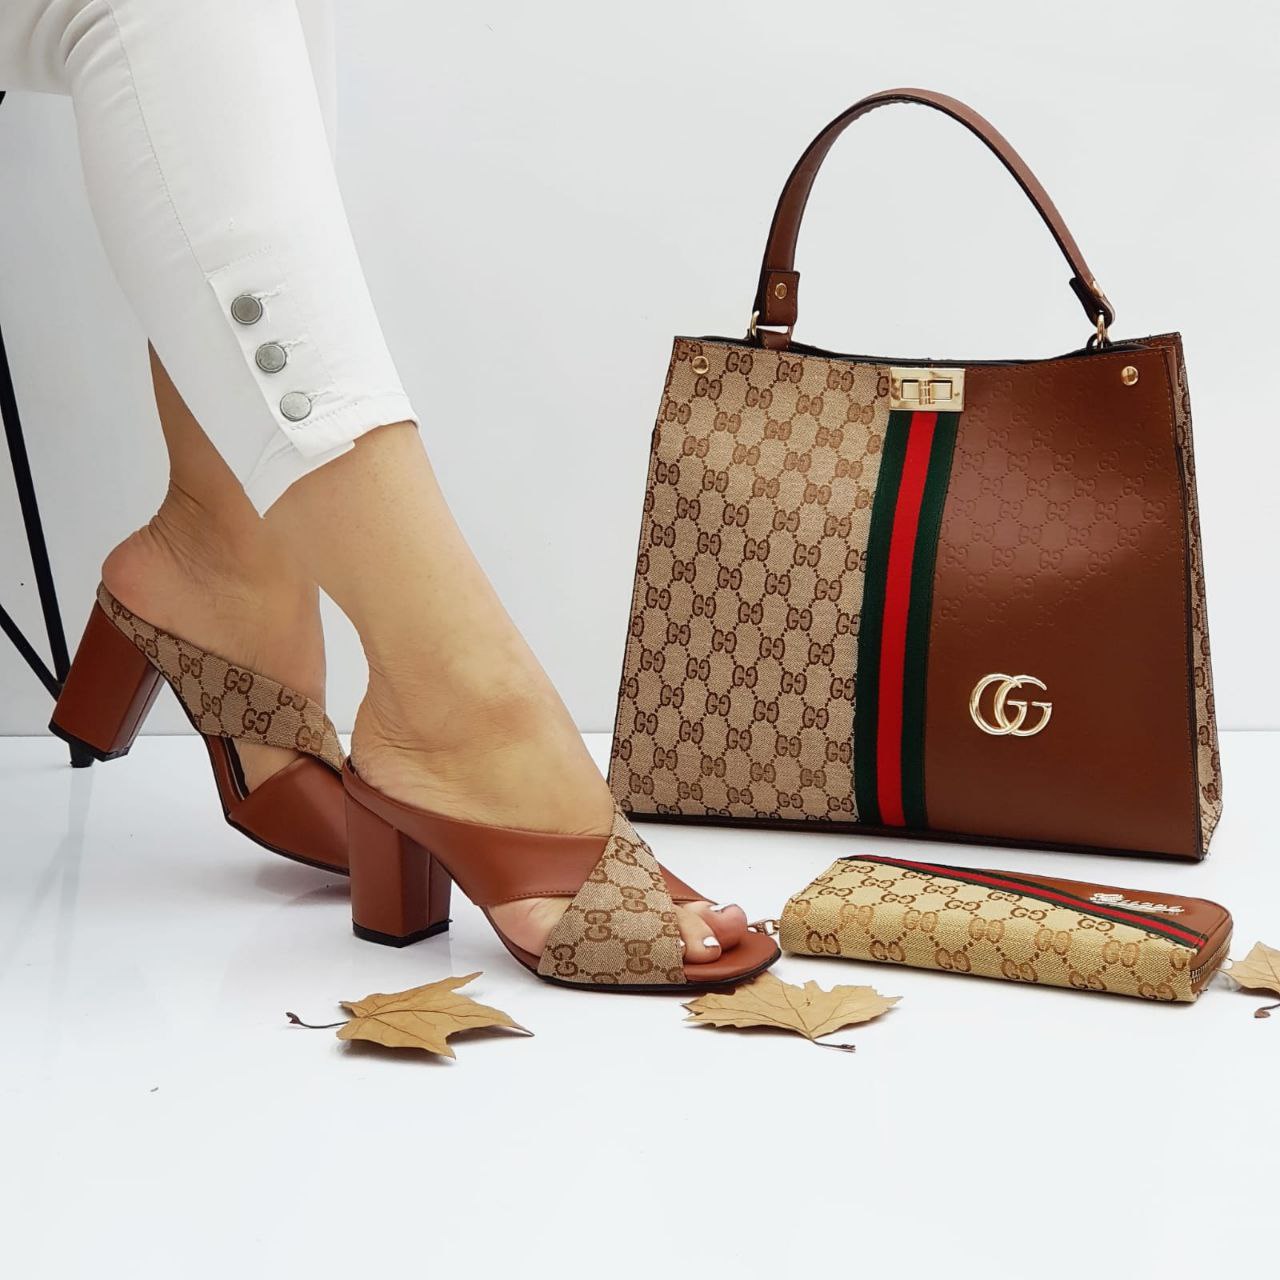 Gucci Leather Upper Block Heel Sandals with tote bag and wallet